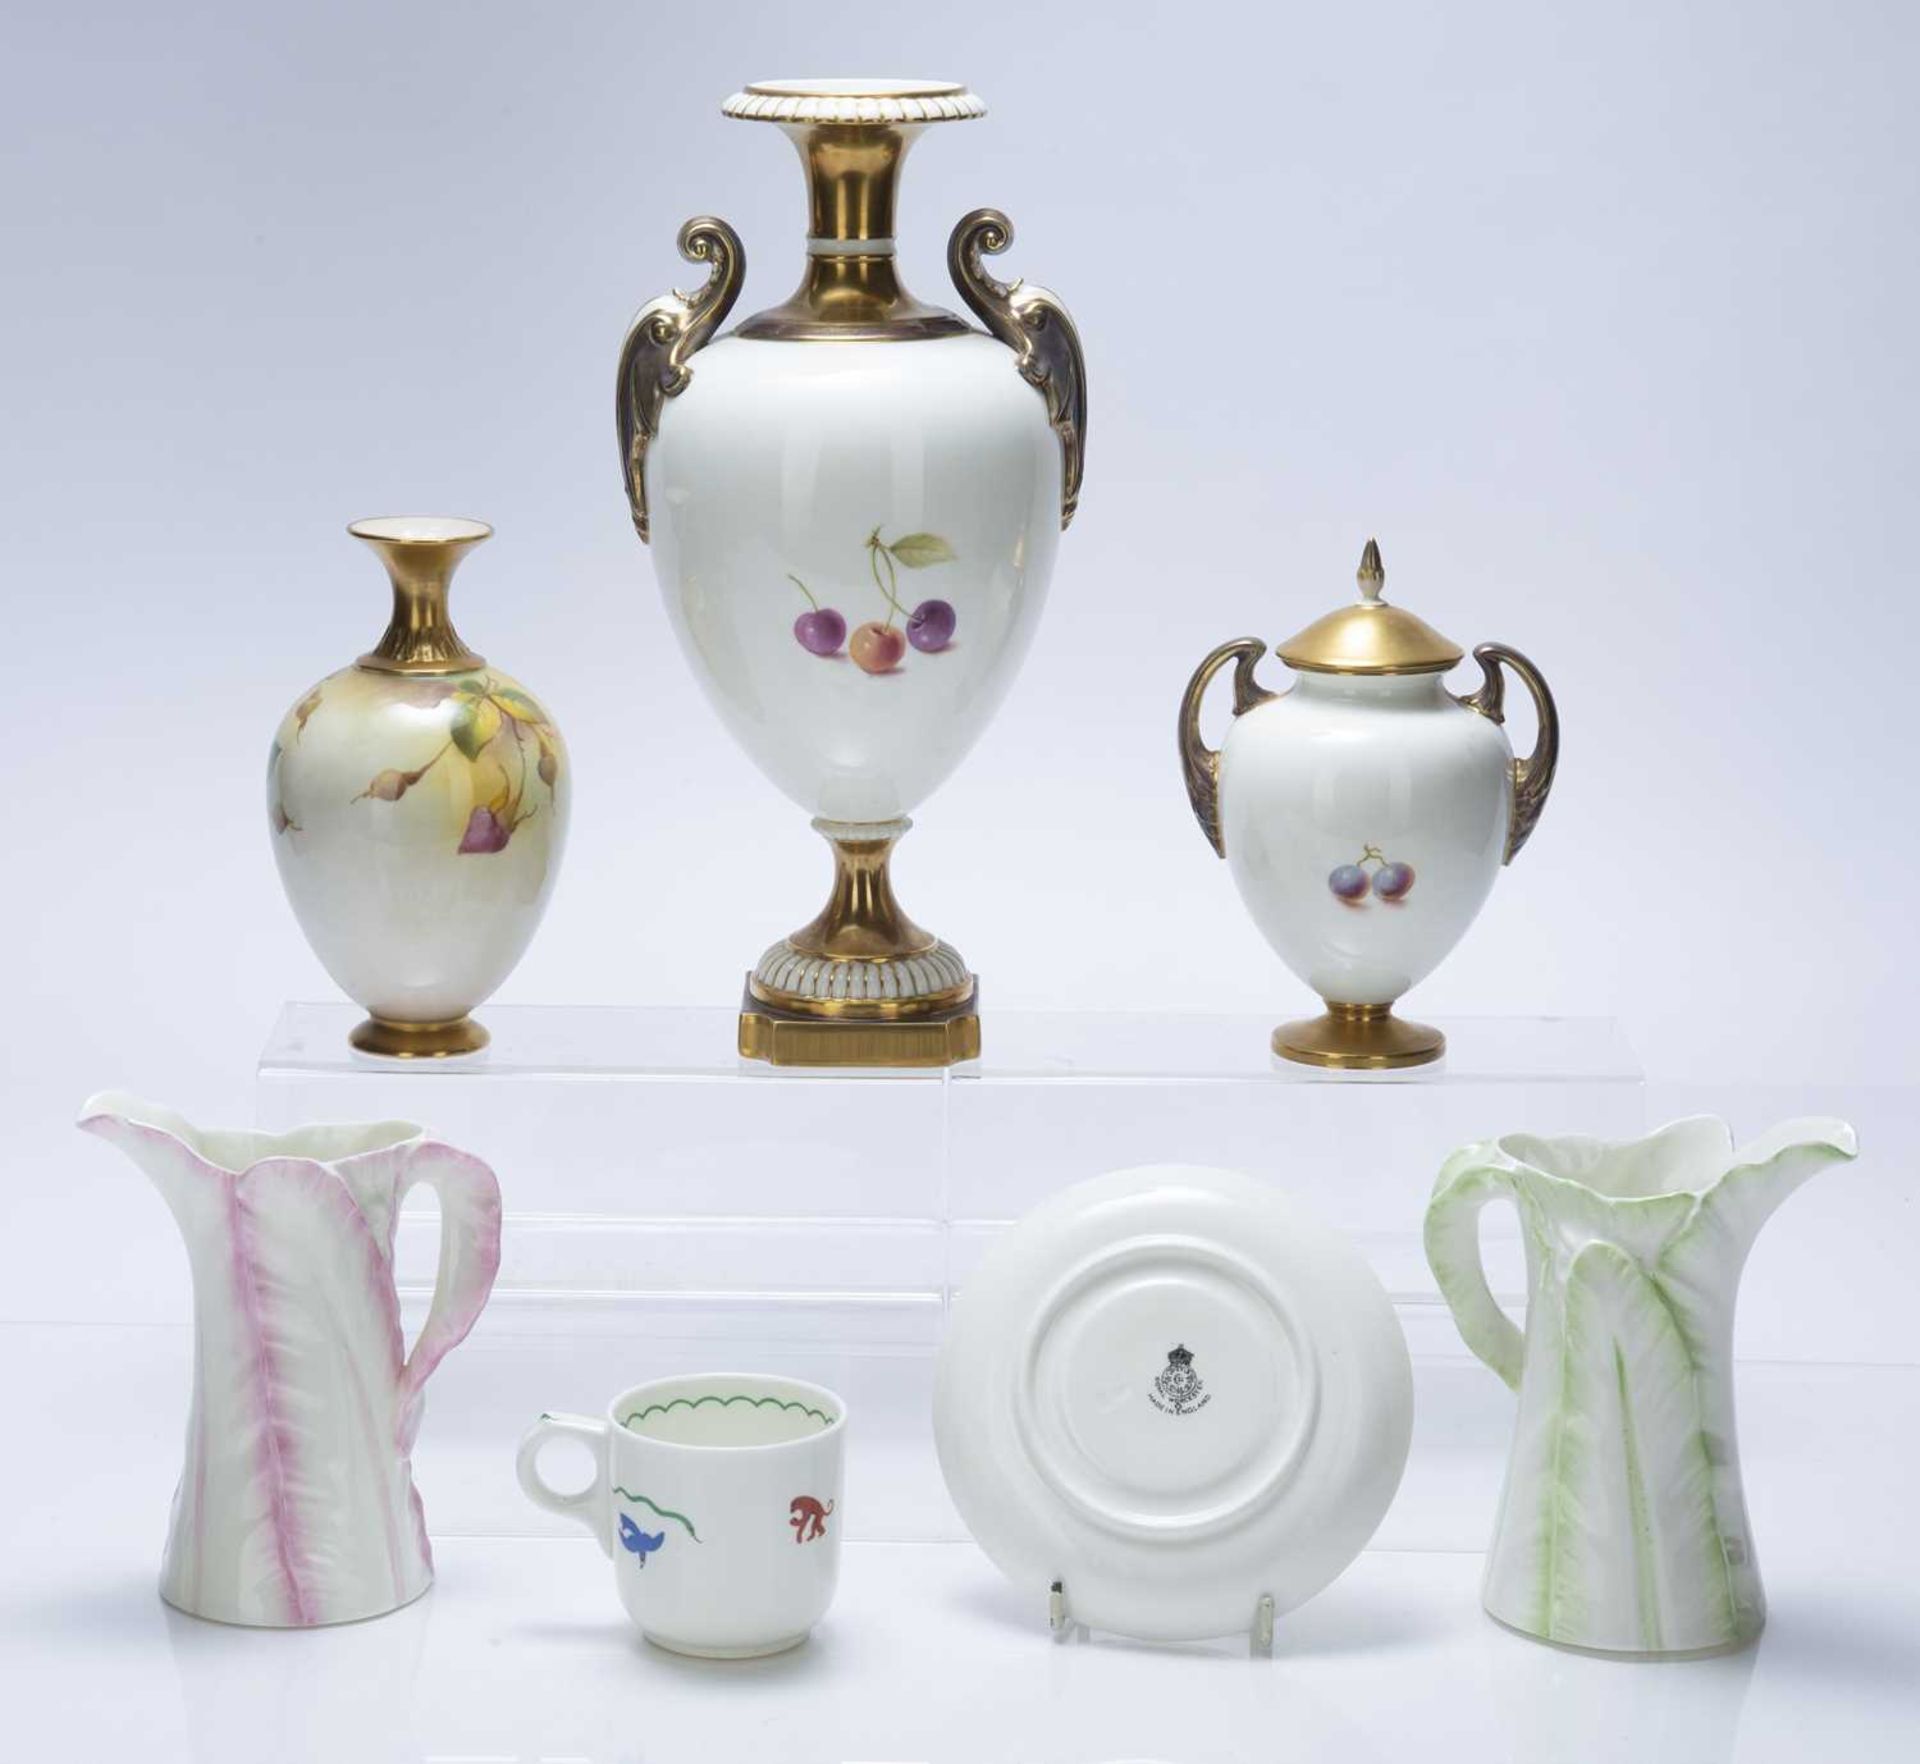 Royal Worcester collection of porcelain consisting of: P. Platt urn vase decorated with fruit, - Image 2 of 6